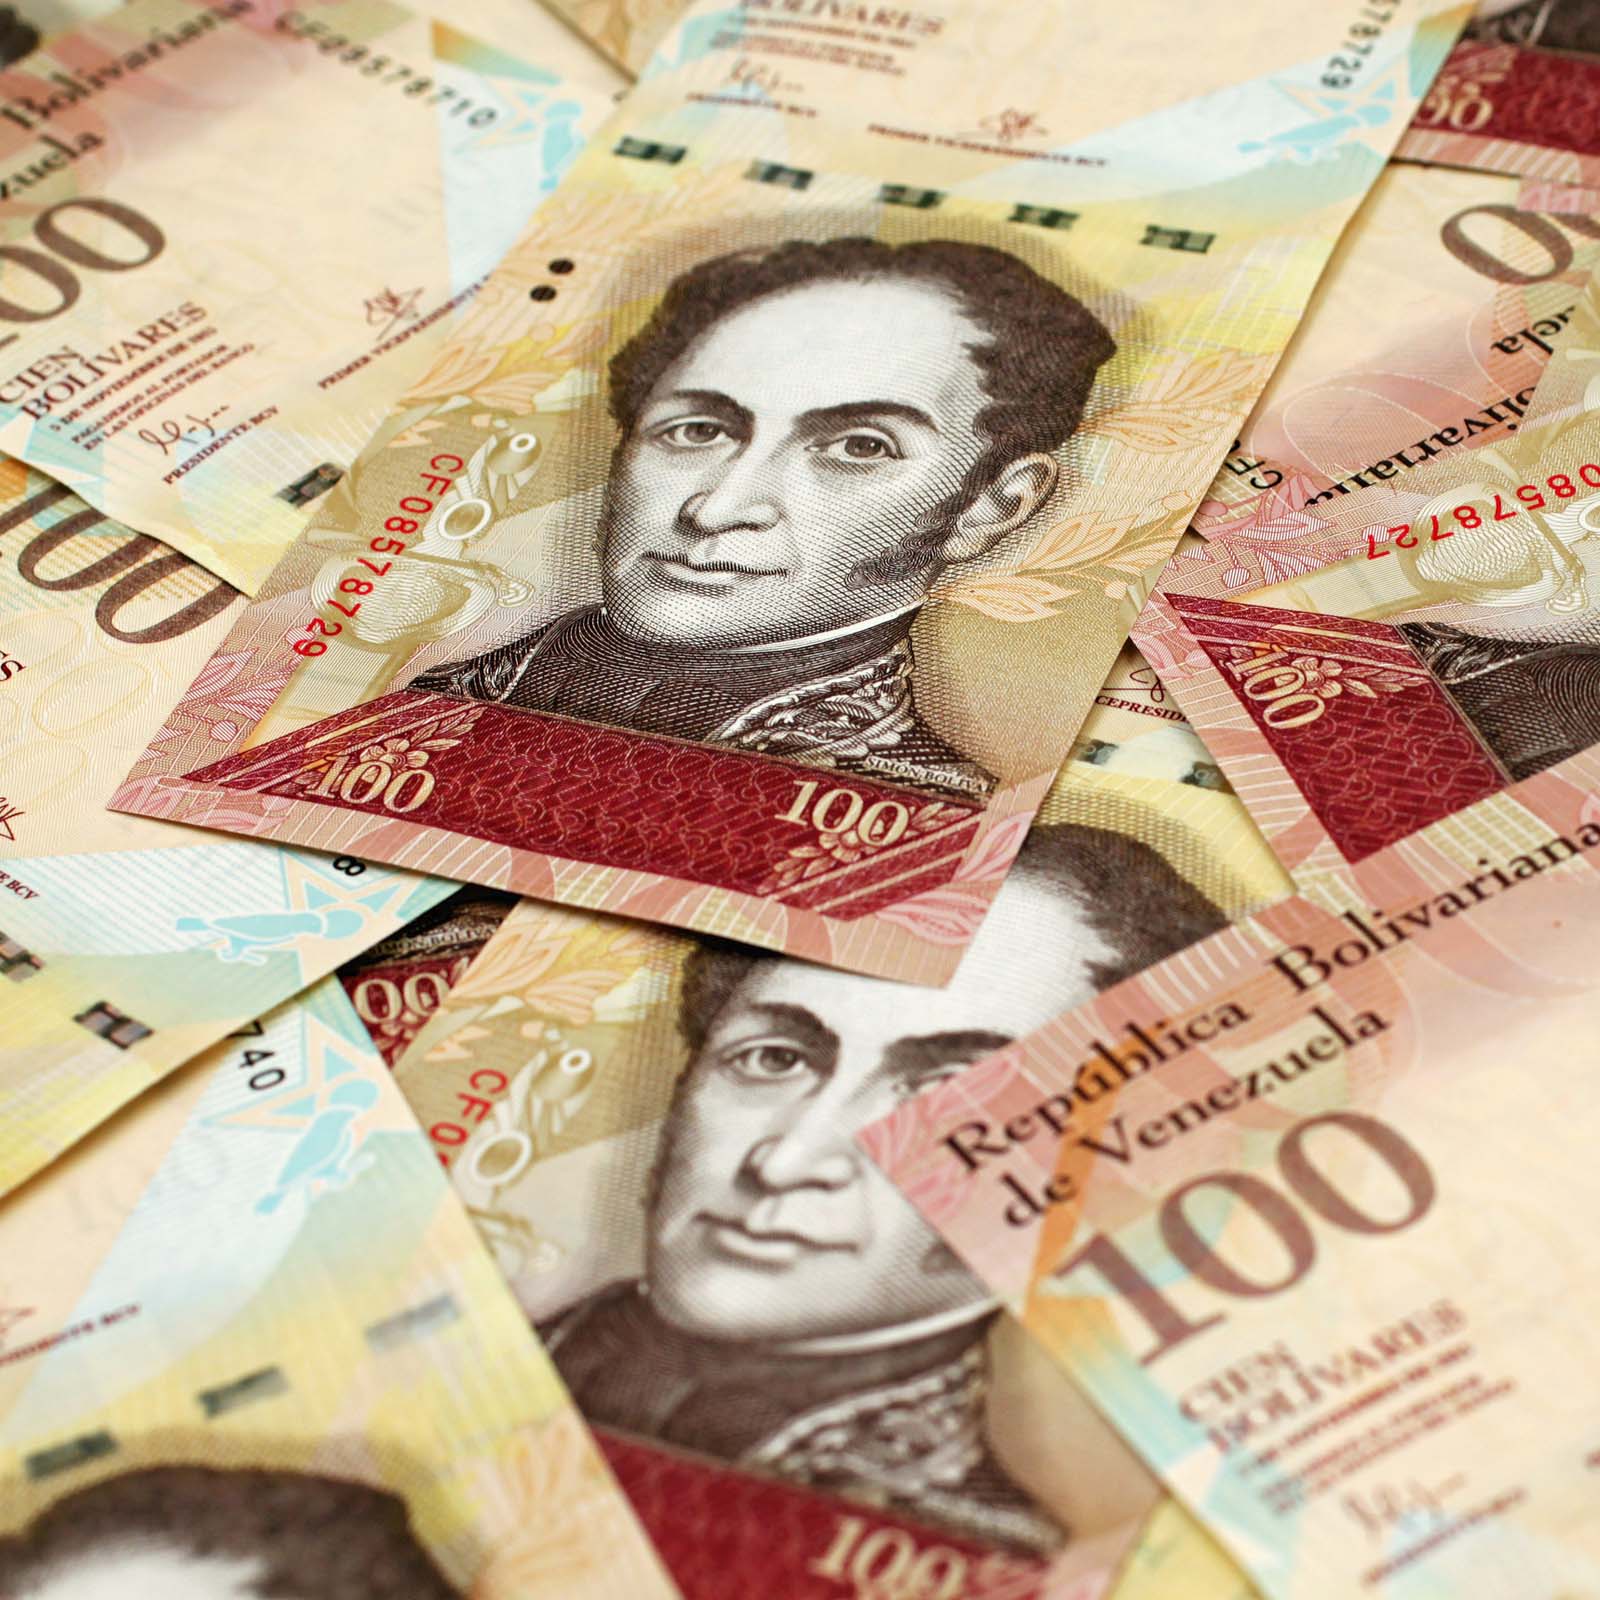 Bolivar ‘Anchored’ to the Petro to Be Issued in August, Maduro Says